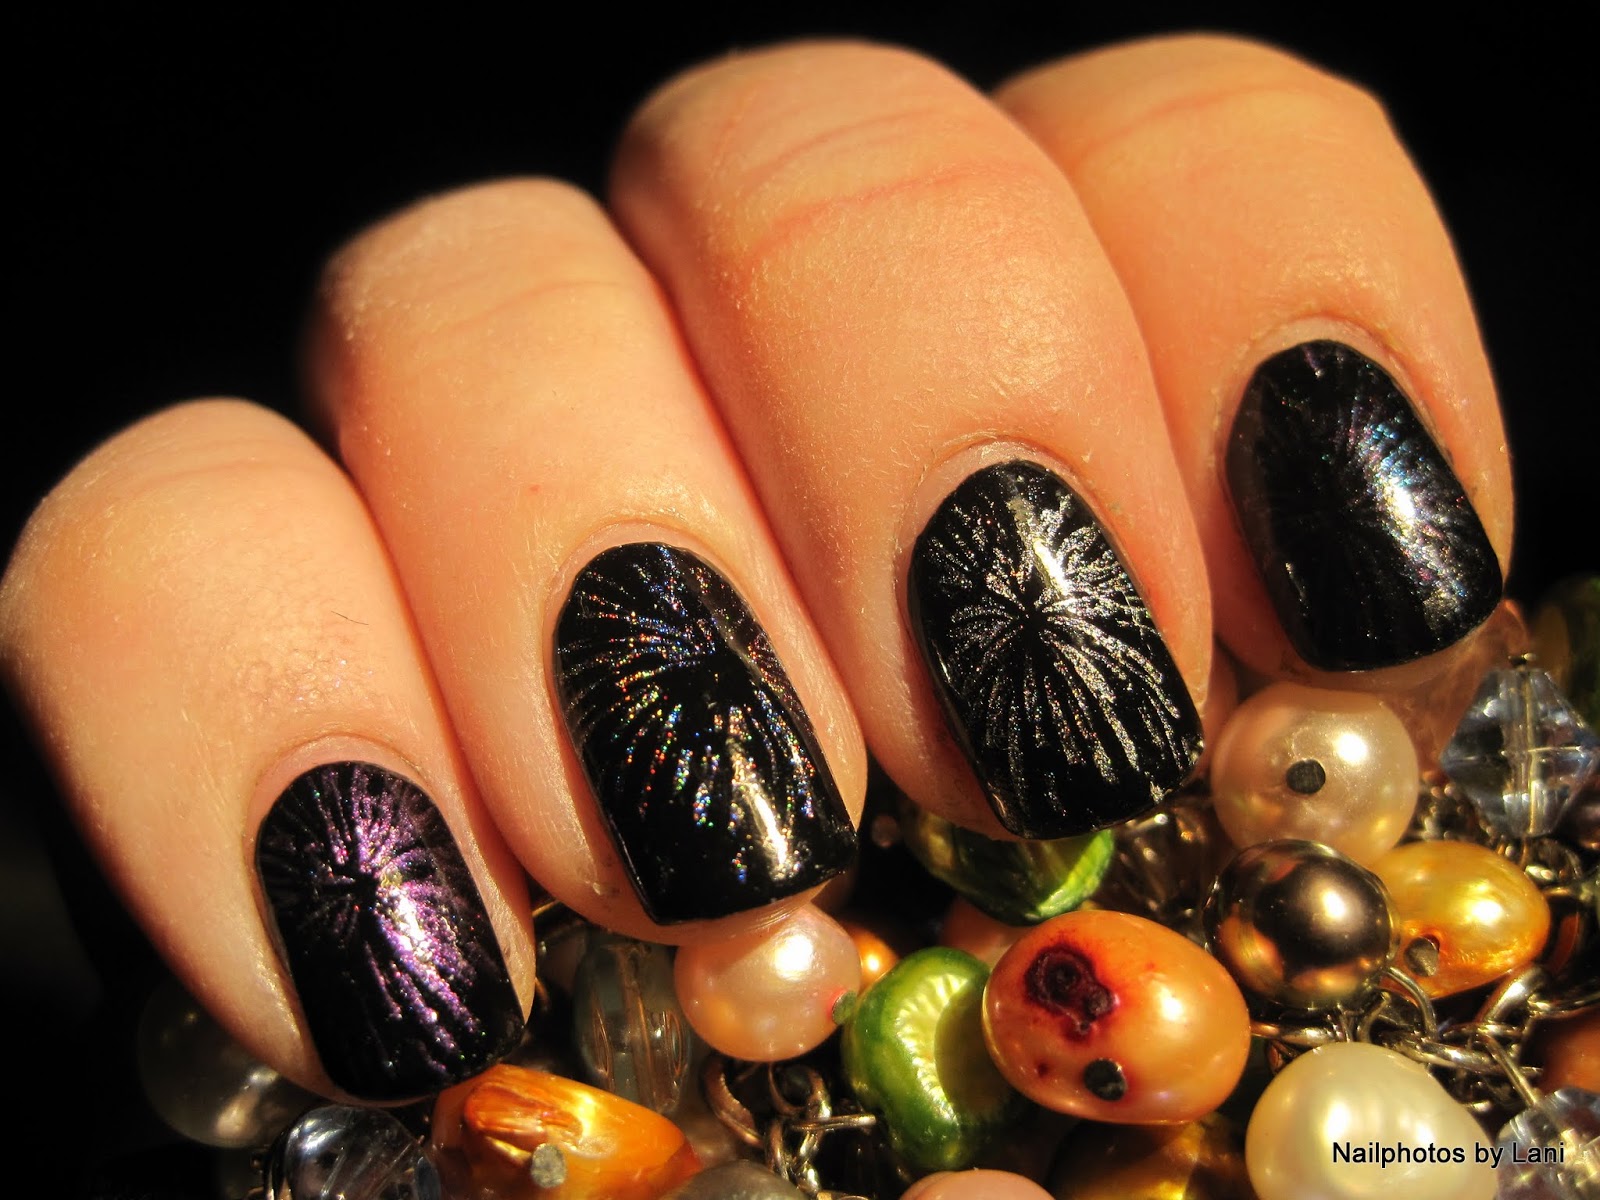 10. Midnight Sky New Year's Eve Nails - wide 5